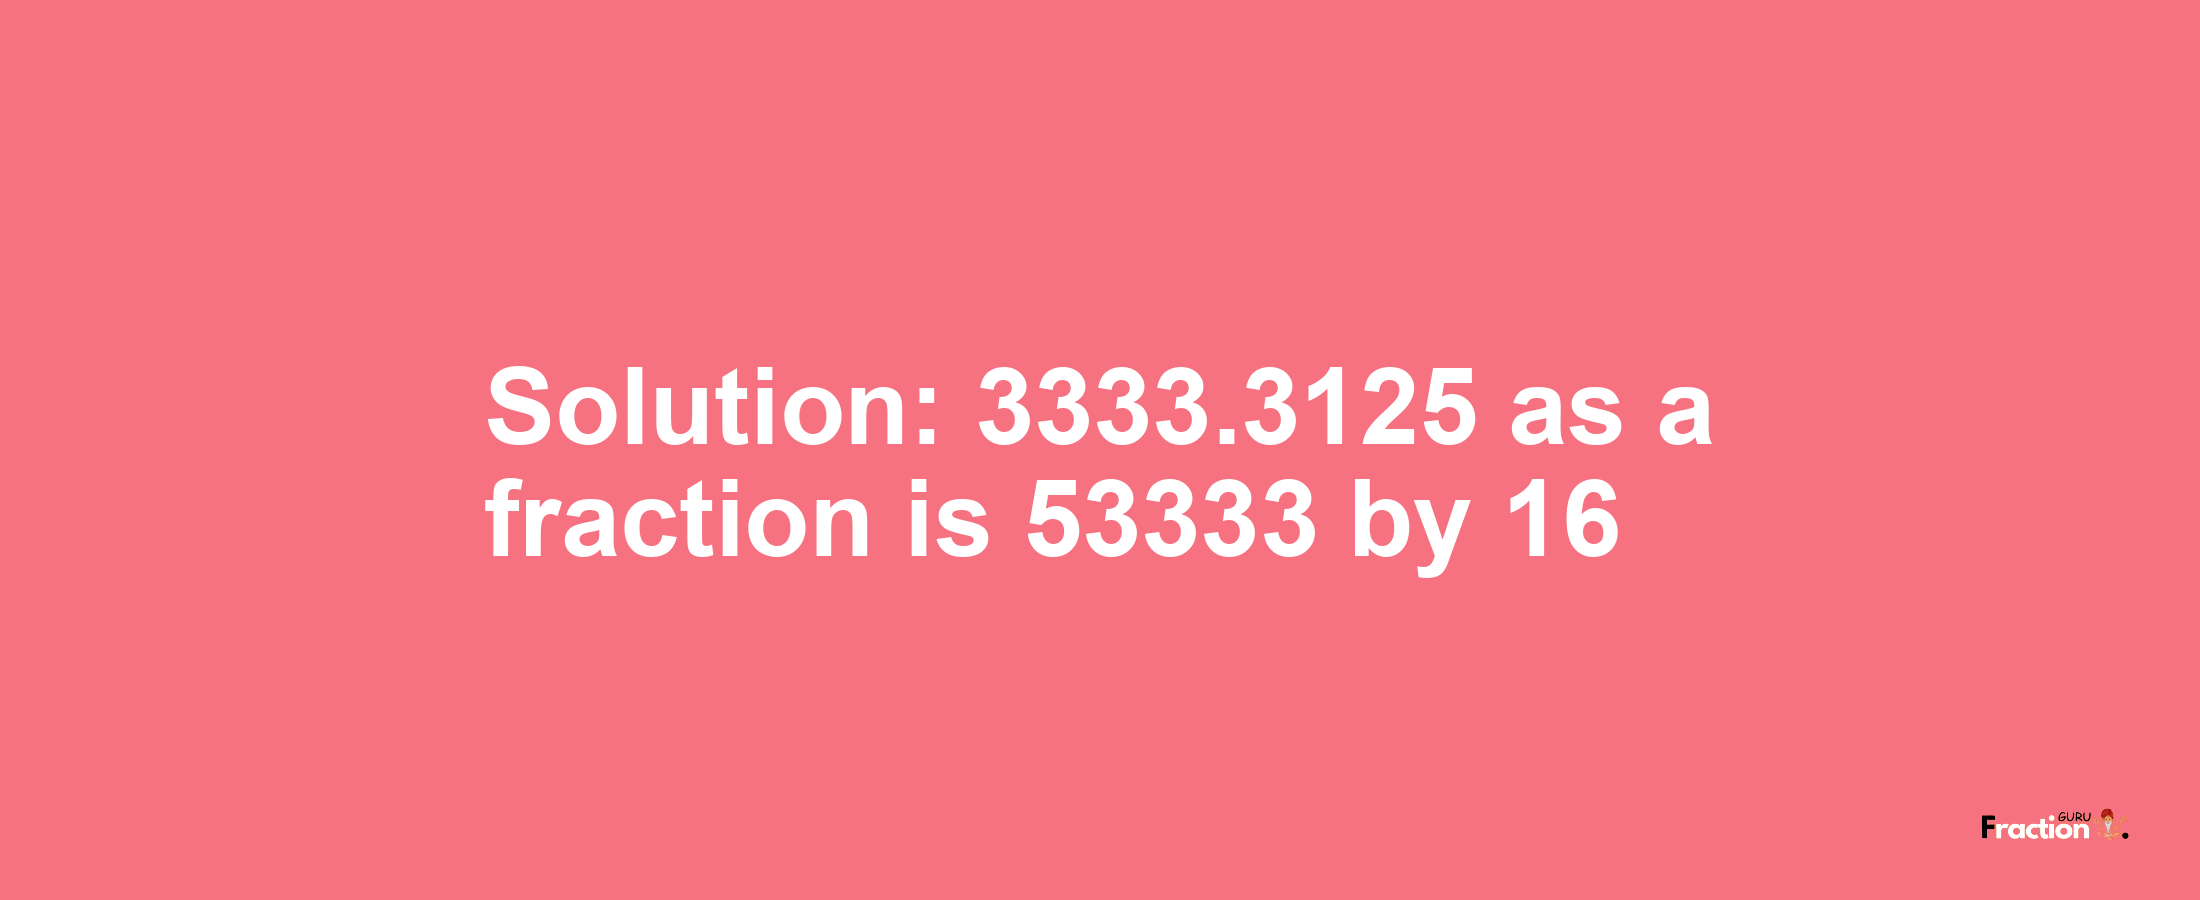 Solution:3333.3125 as a fraction is 53333/16